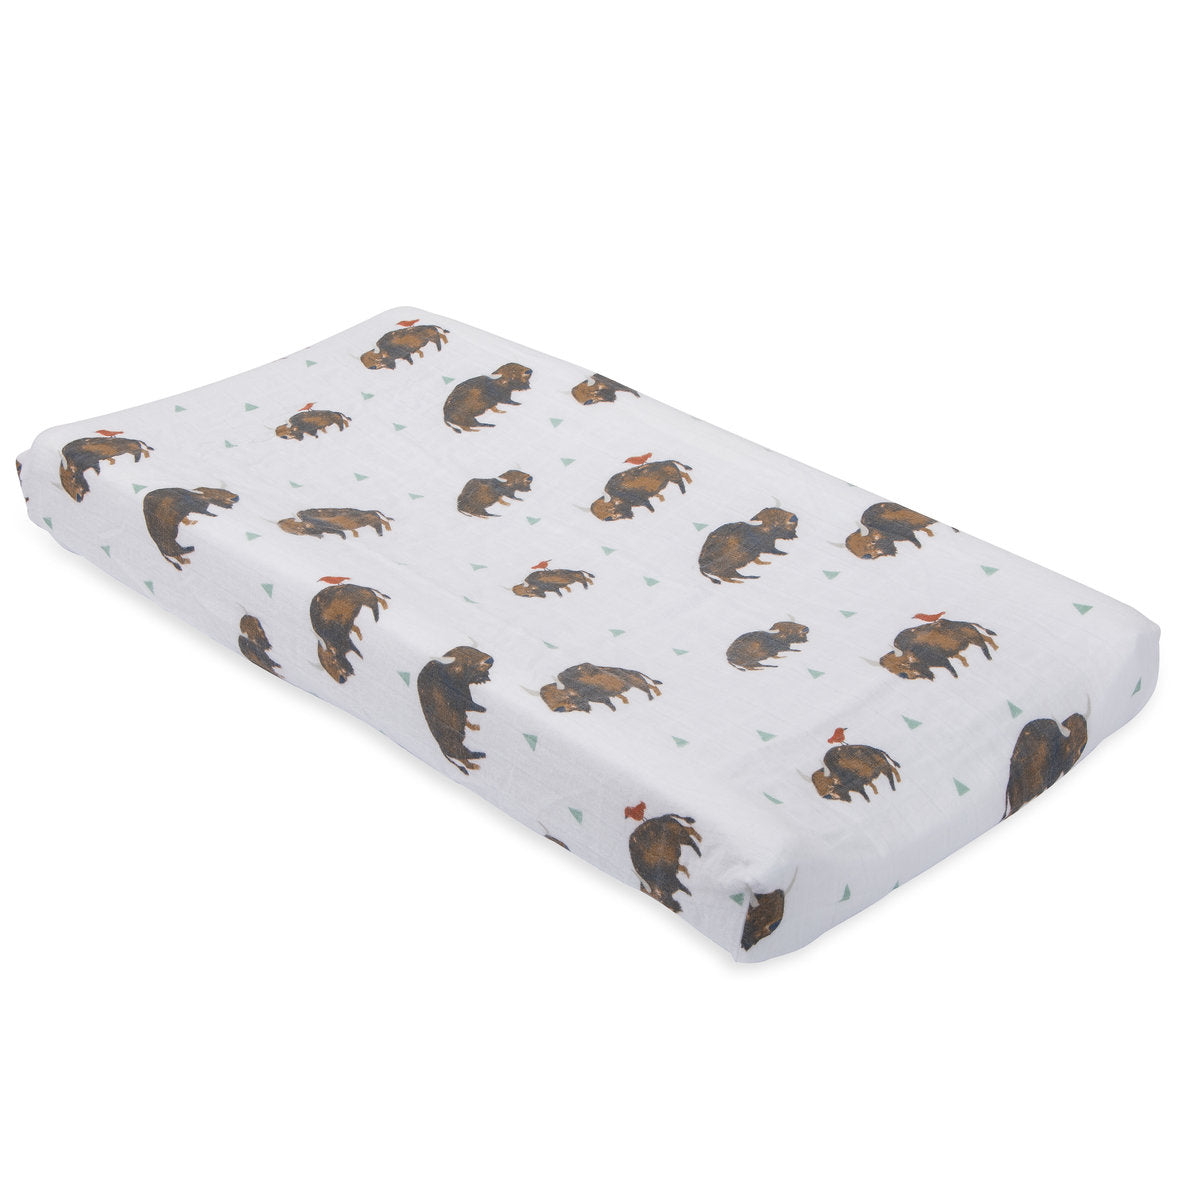 Cotton Muslin Change Pad Cover